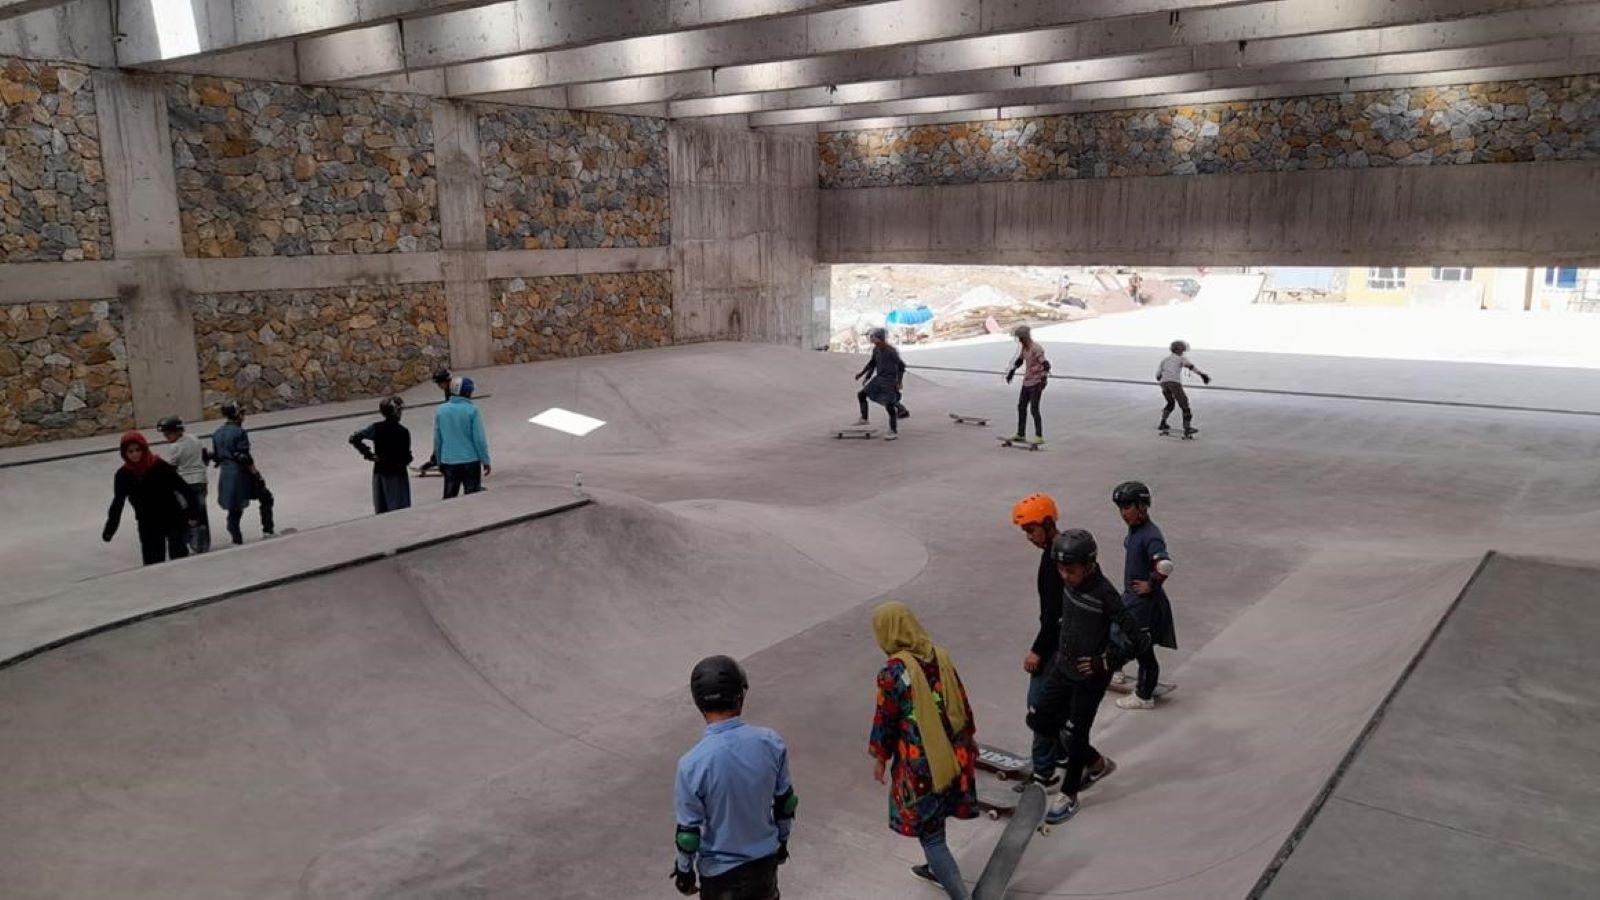 Skateistan students skate the park in Bamyan for the first time